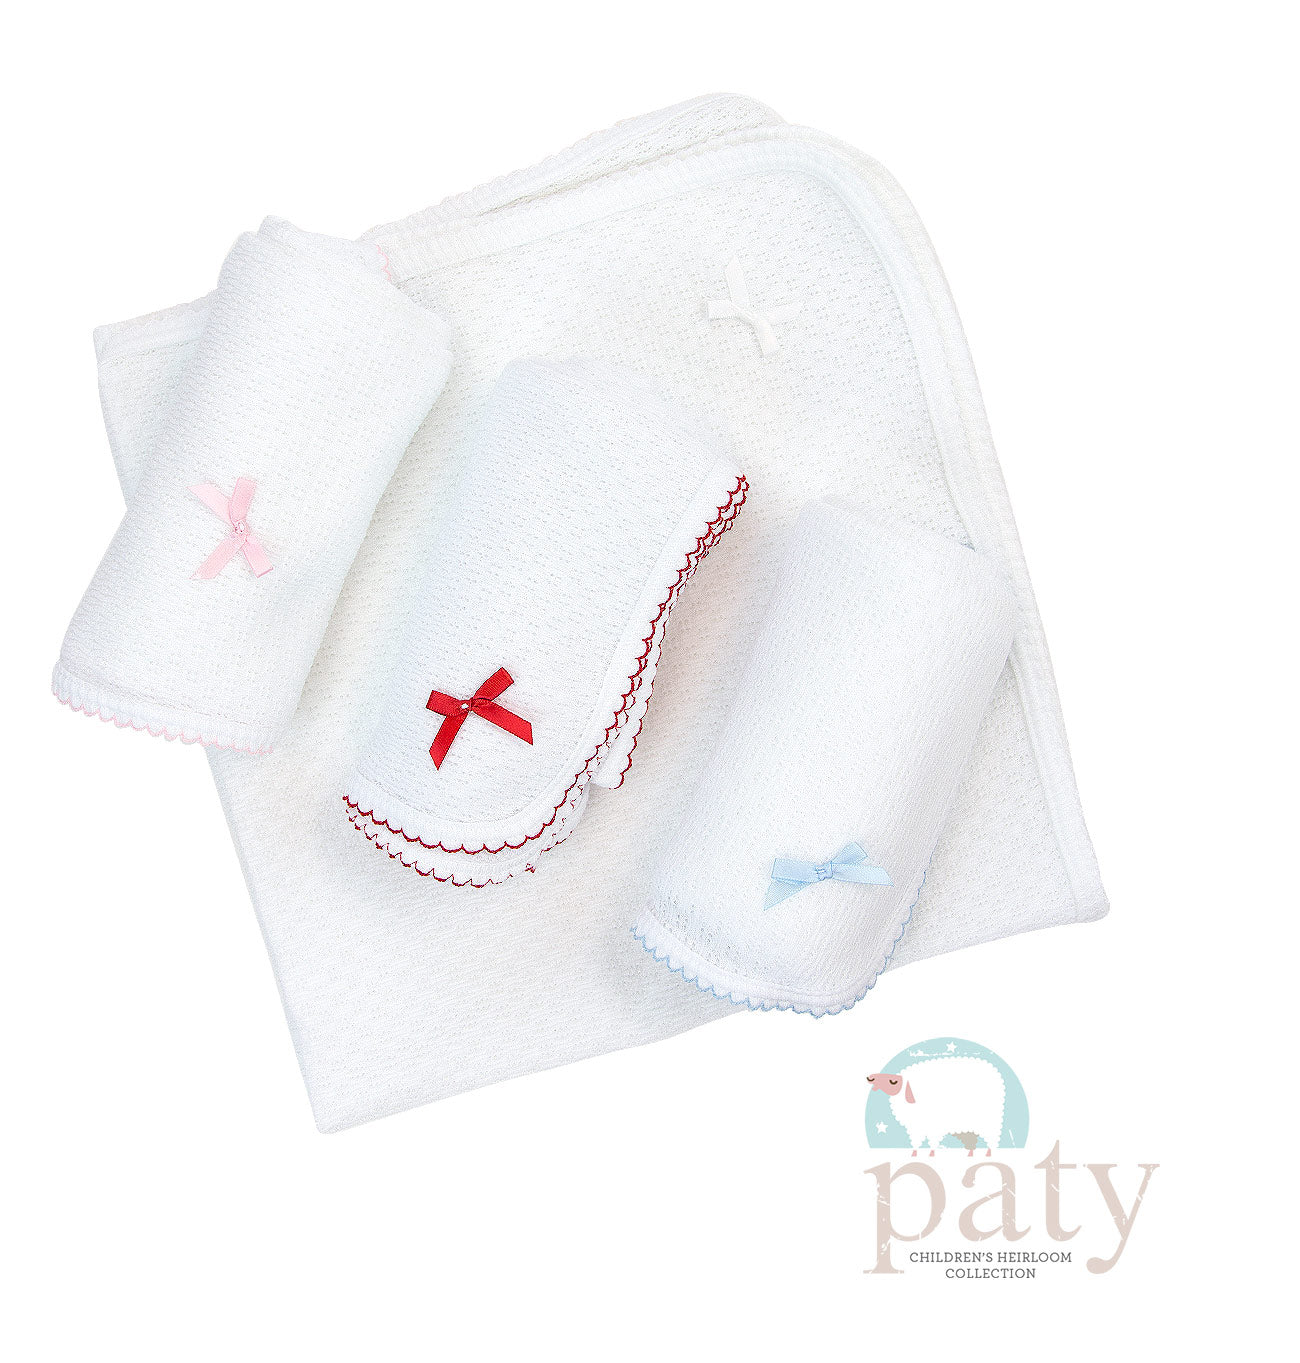 Paty Swaddle Blanket with Bow